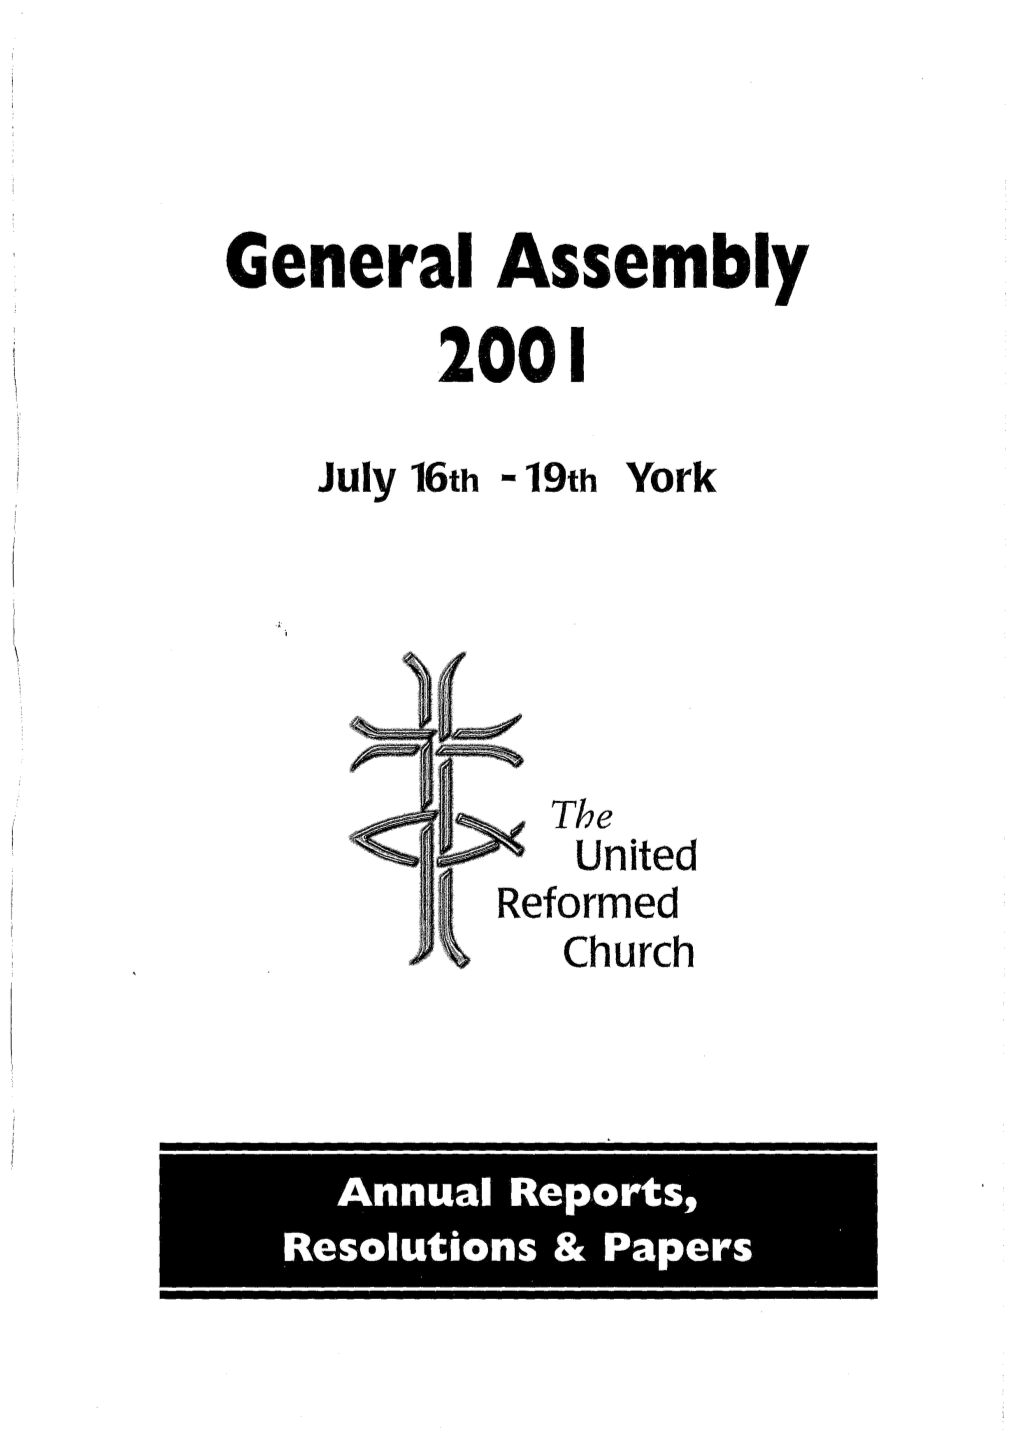 General Assembly 2001